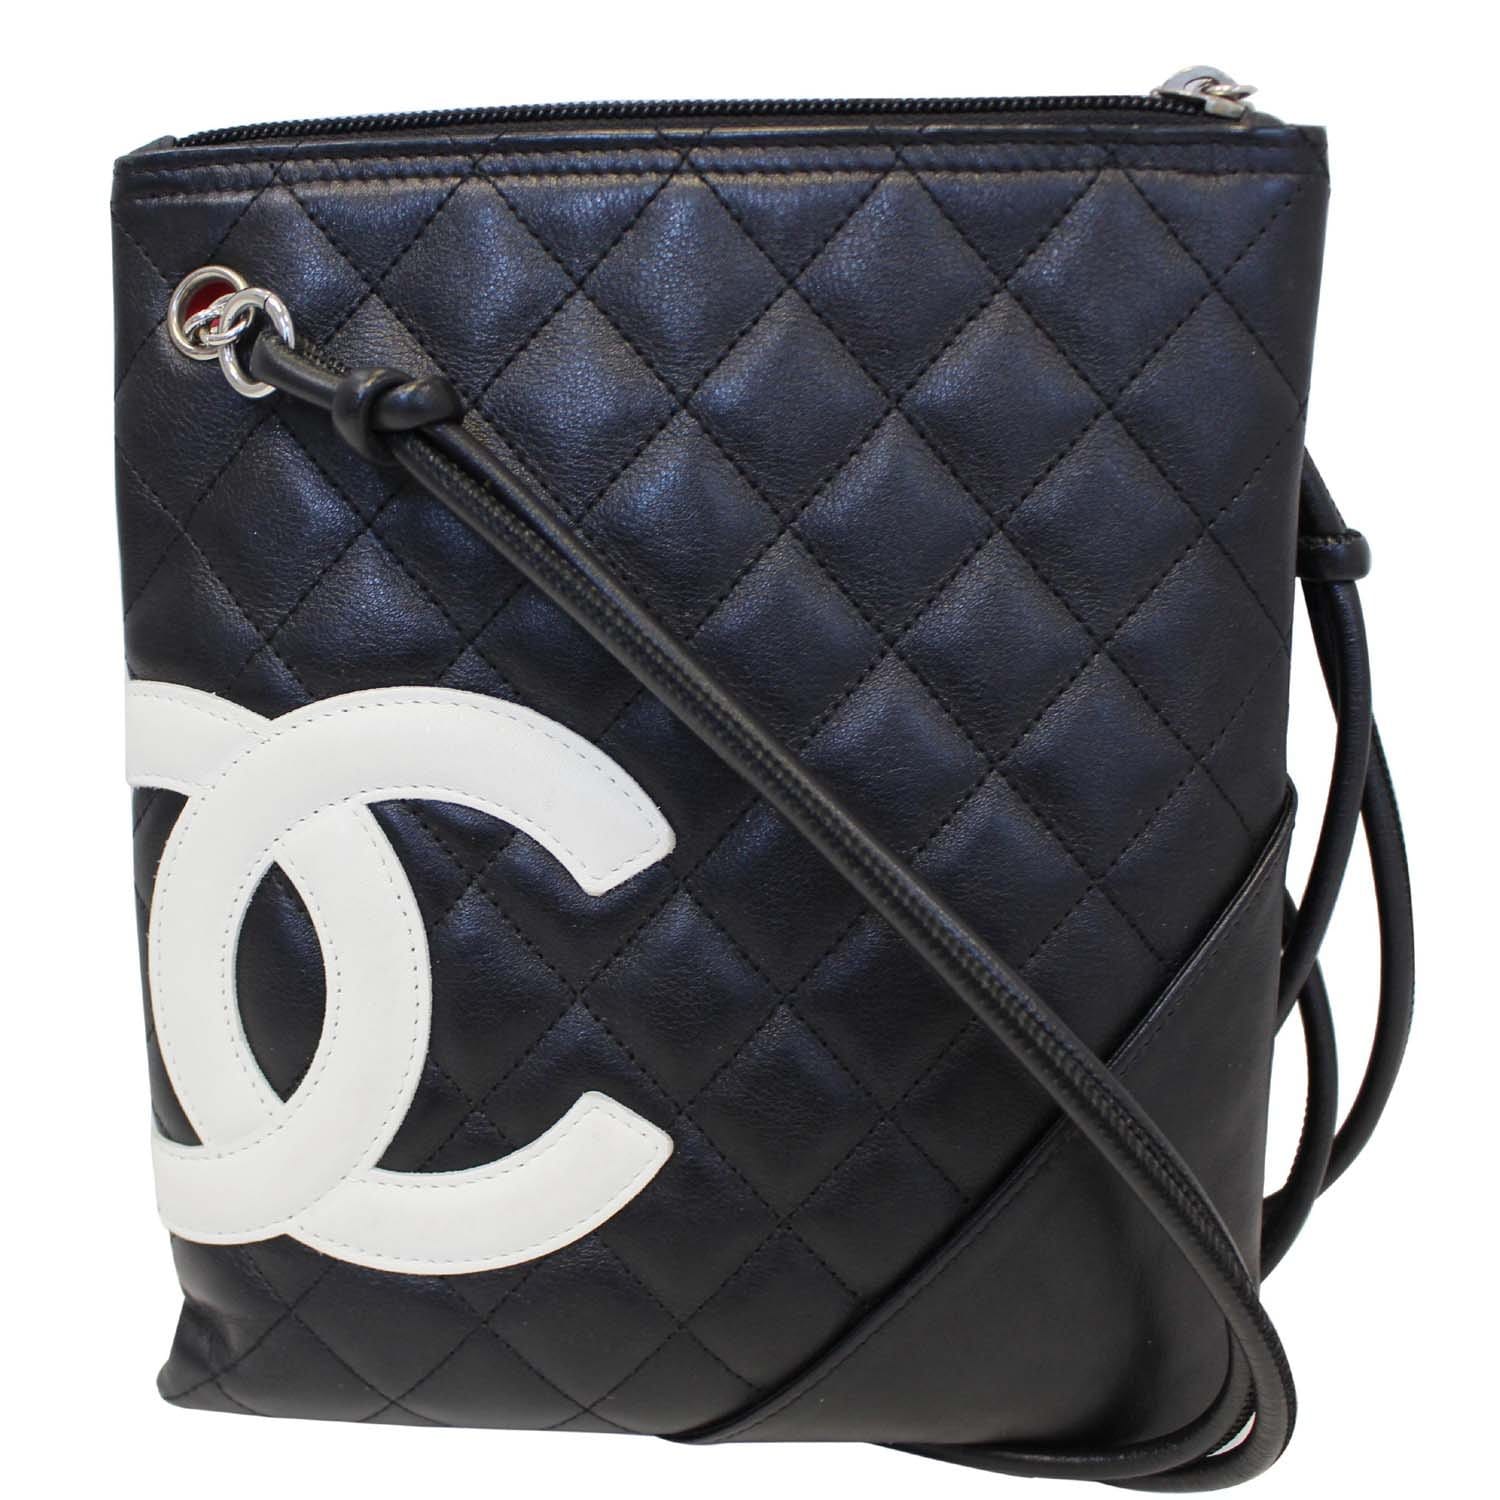 Cambon leather crossbody bag Chanel Black in Leather - 21929447